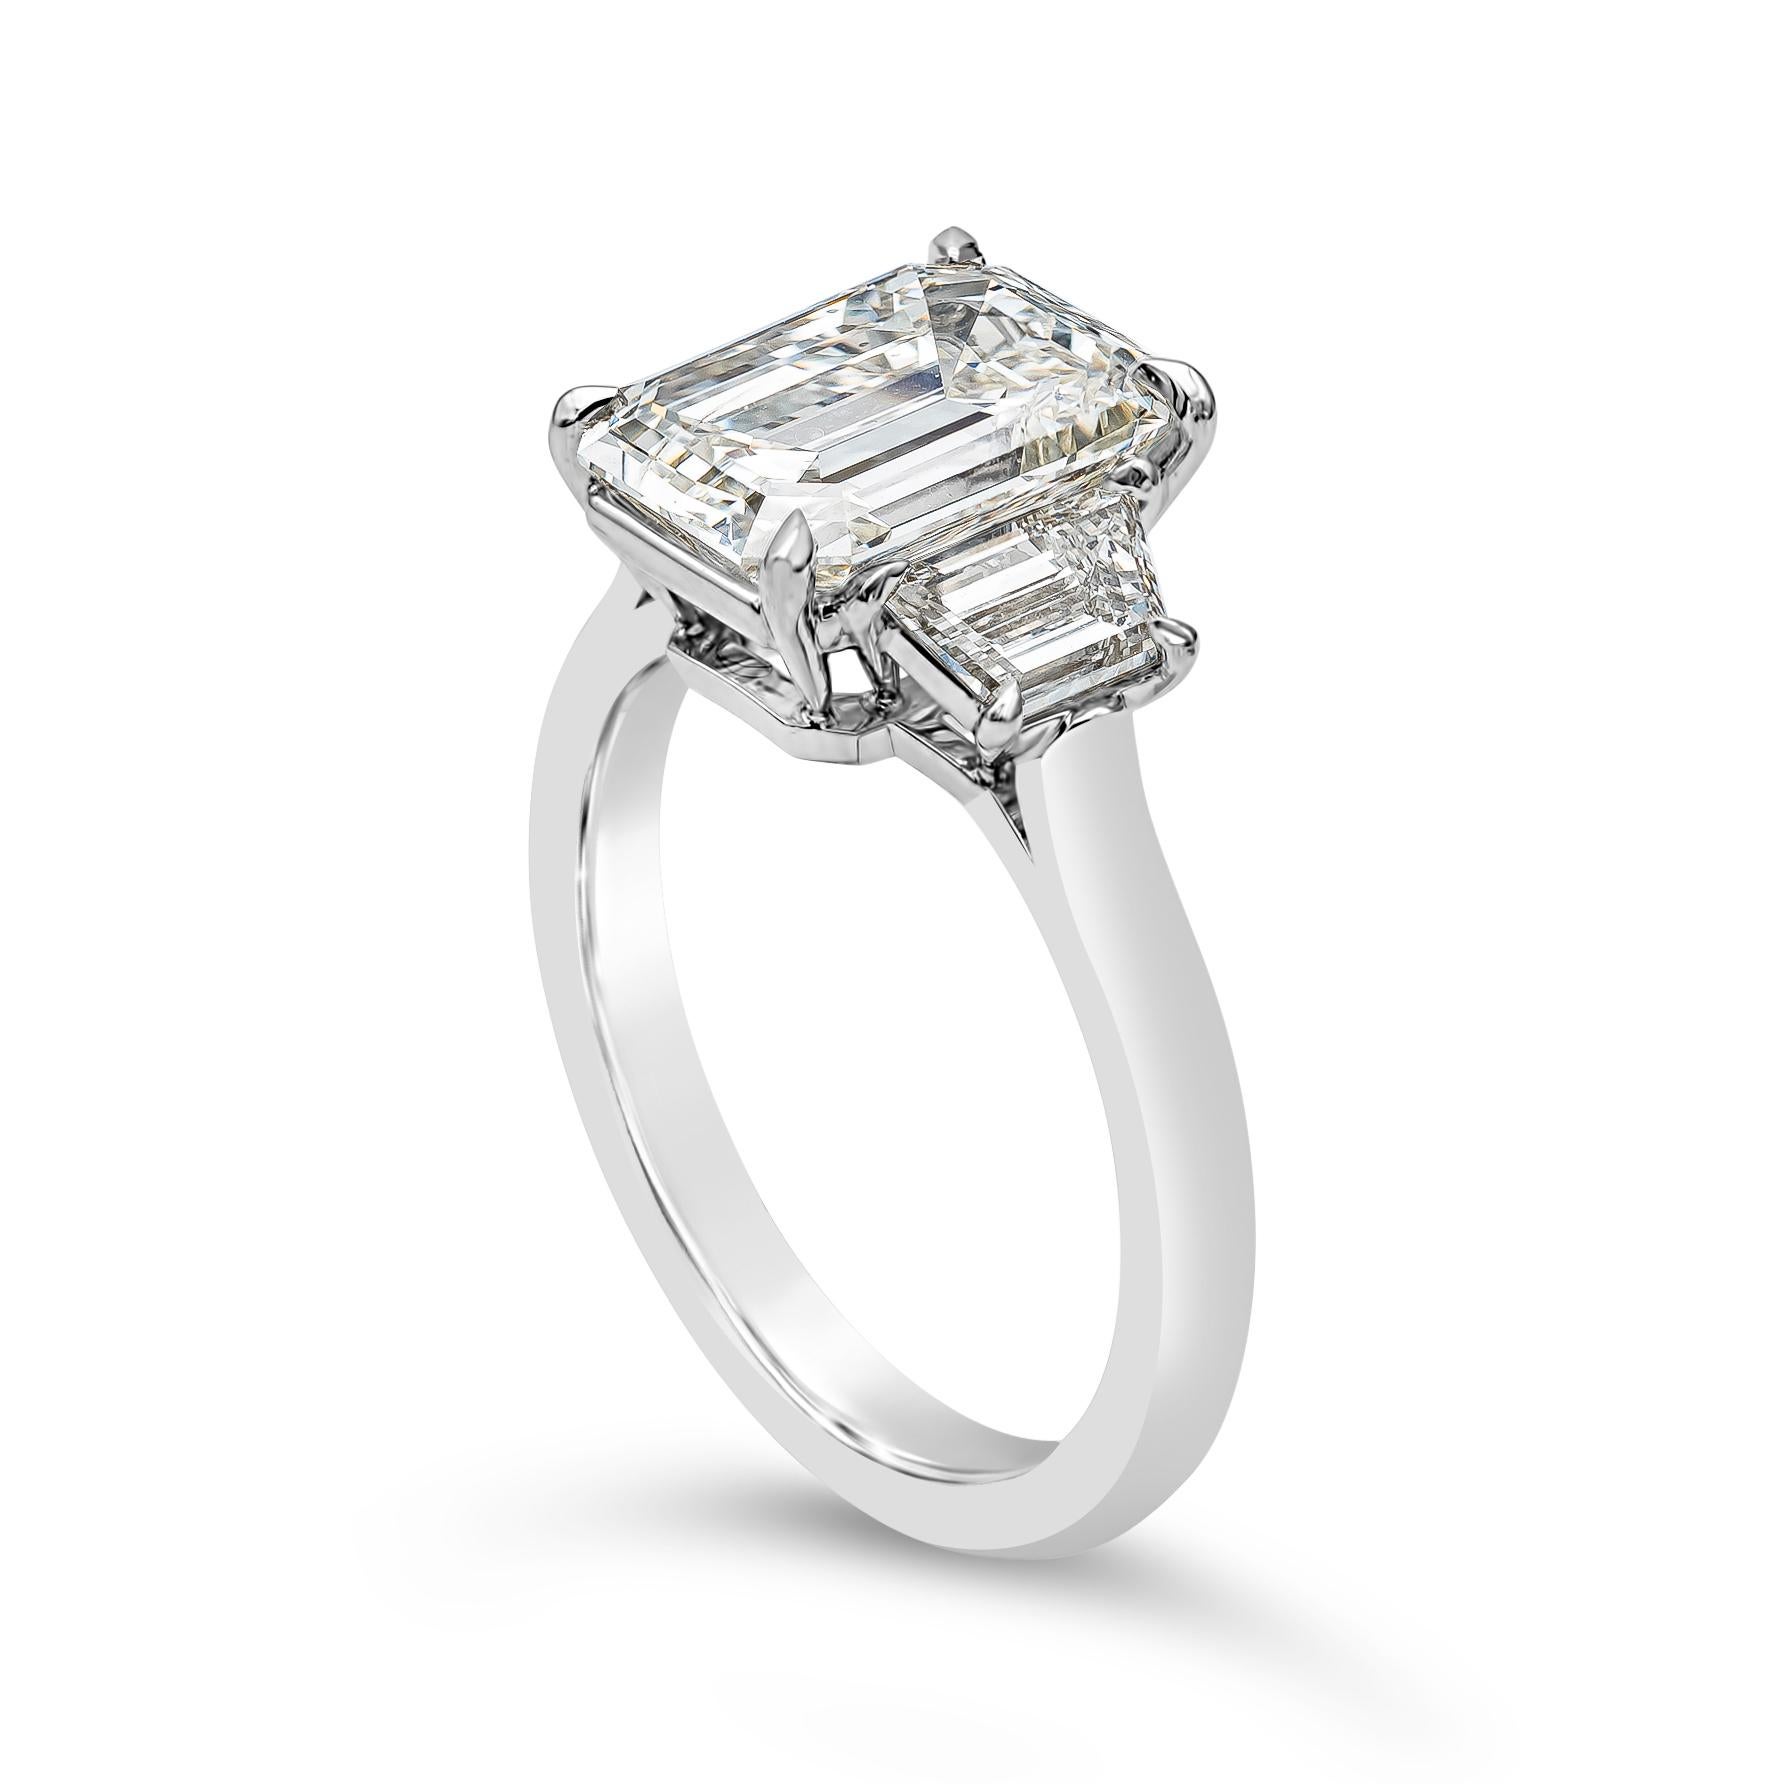 Features a 3.21 carat emerald cut diamond certified by GIA as K color, SI2 clarity, flanked by step-cut trapezoid diamonds on either side. Set in a platinum mounting. Size 6 US (sizable upon request).

Style available in different price ranges.